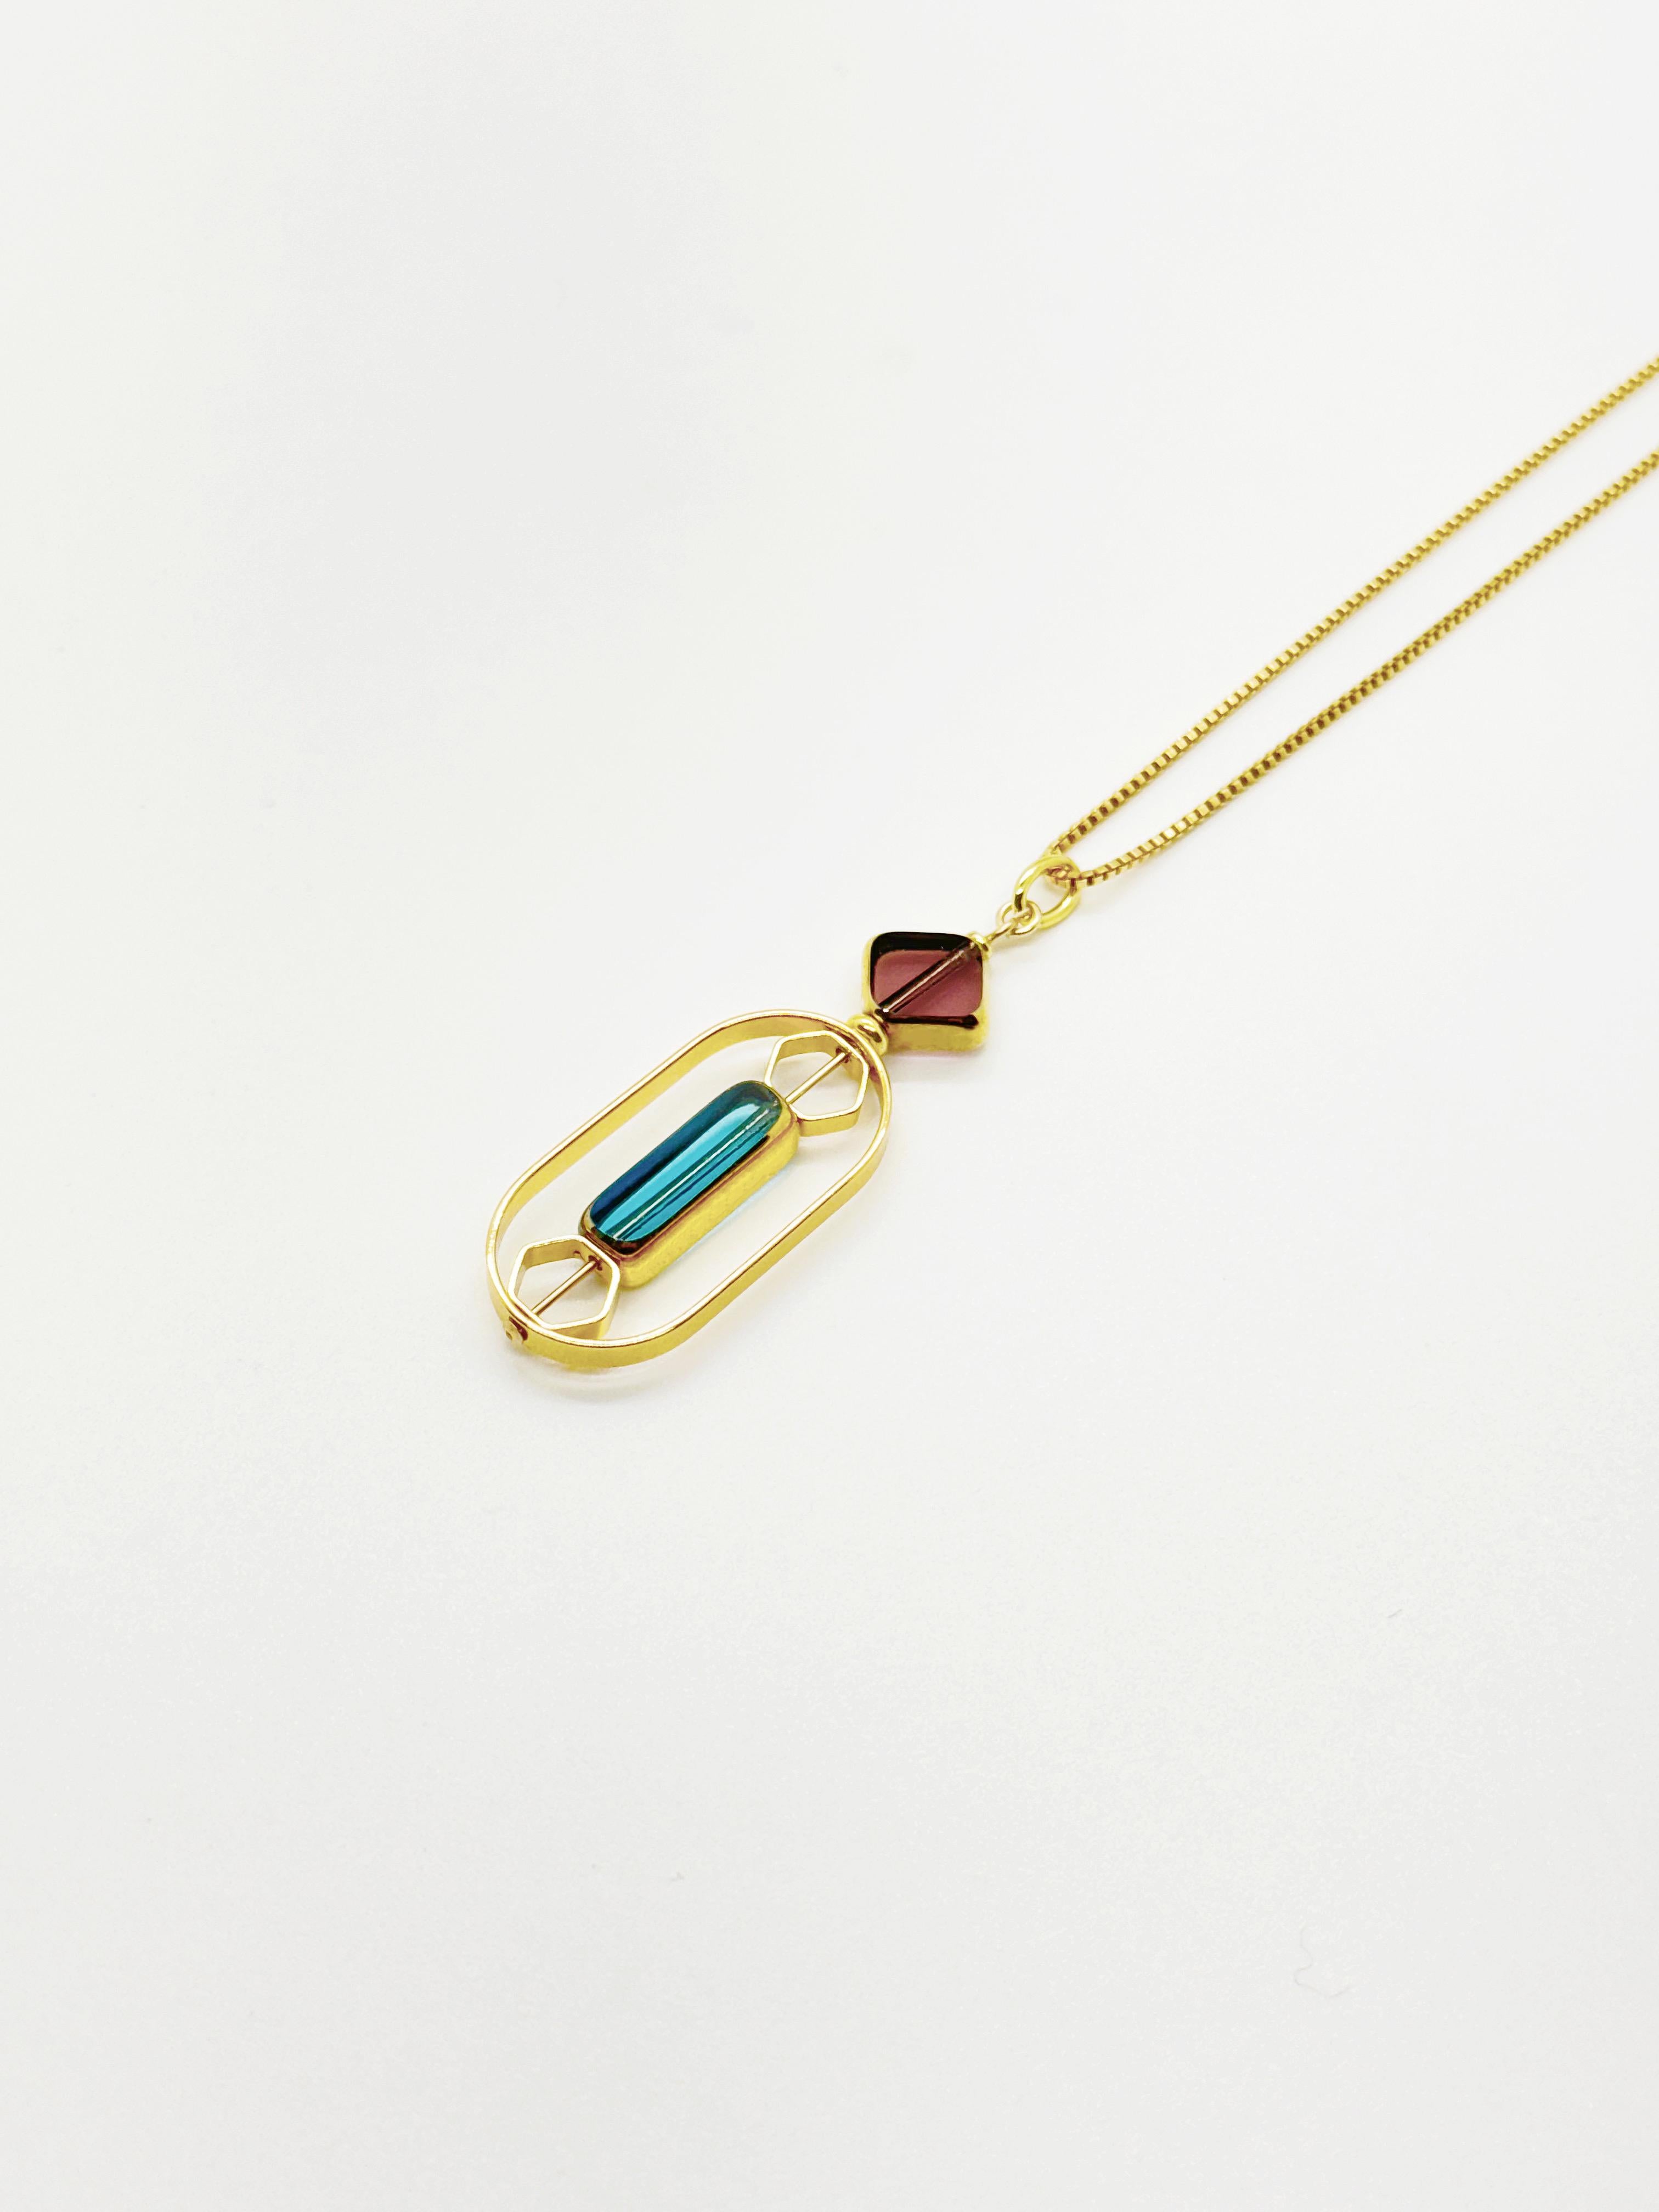 The pendant consists of translucent burgundy and light blue vintage German glass beads and is finished with an 18-inch gold-filled chain. 

The beads are new old stock vintage German glass beads that are framed with 24K gold. The beads were